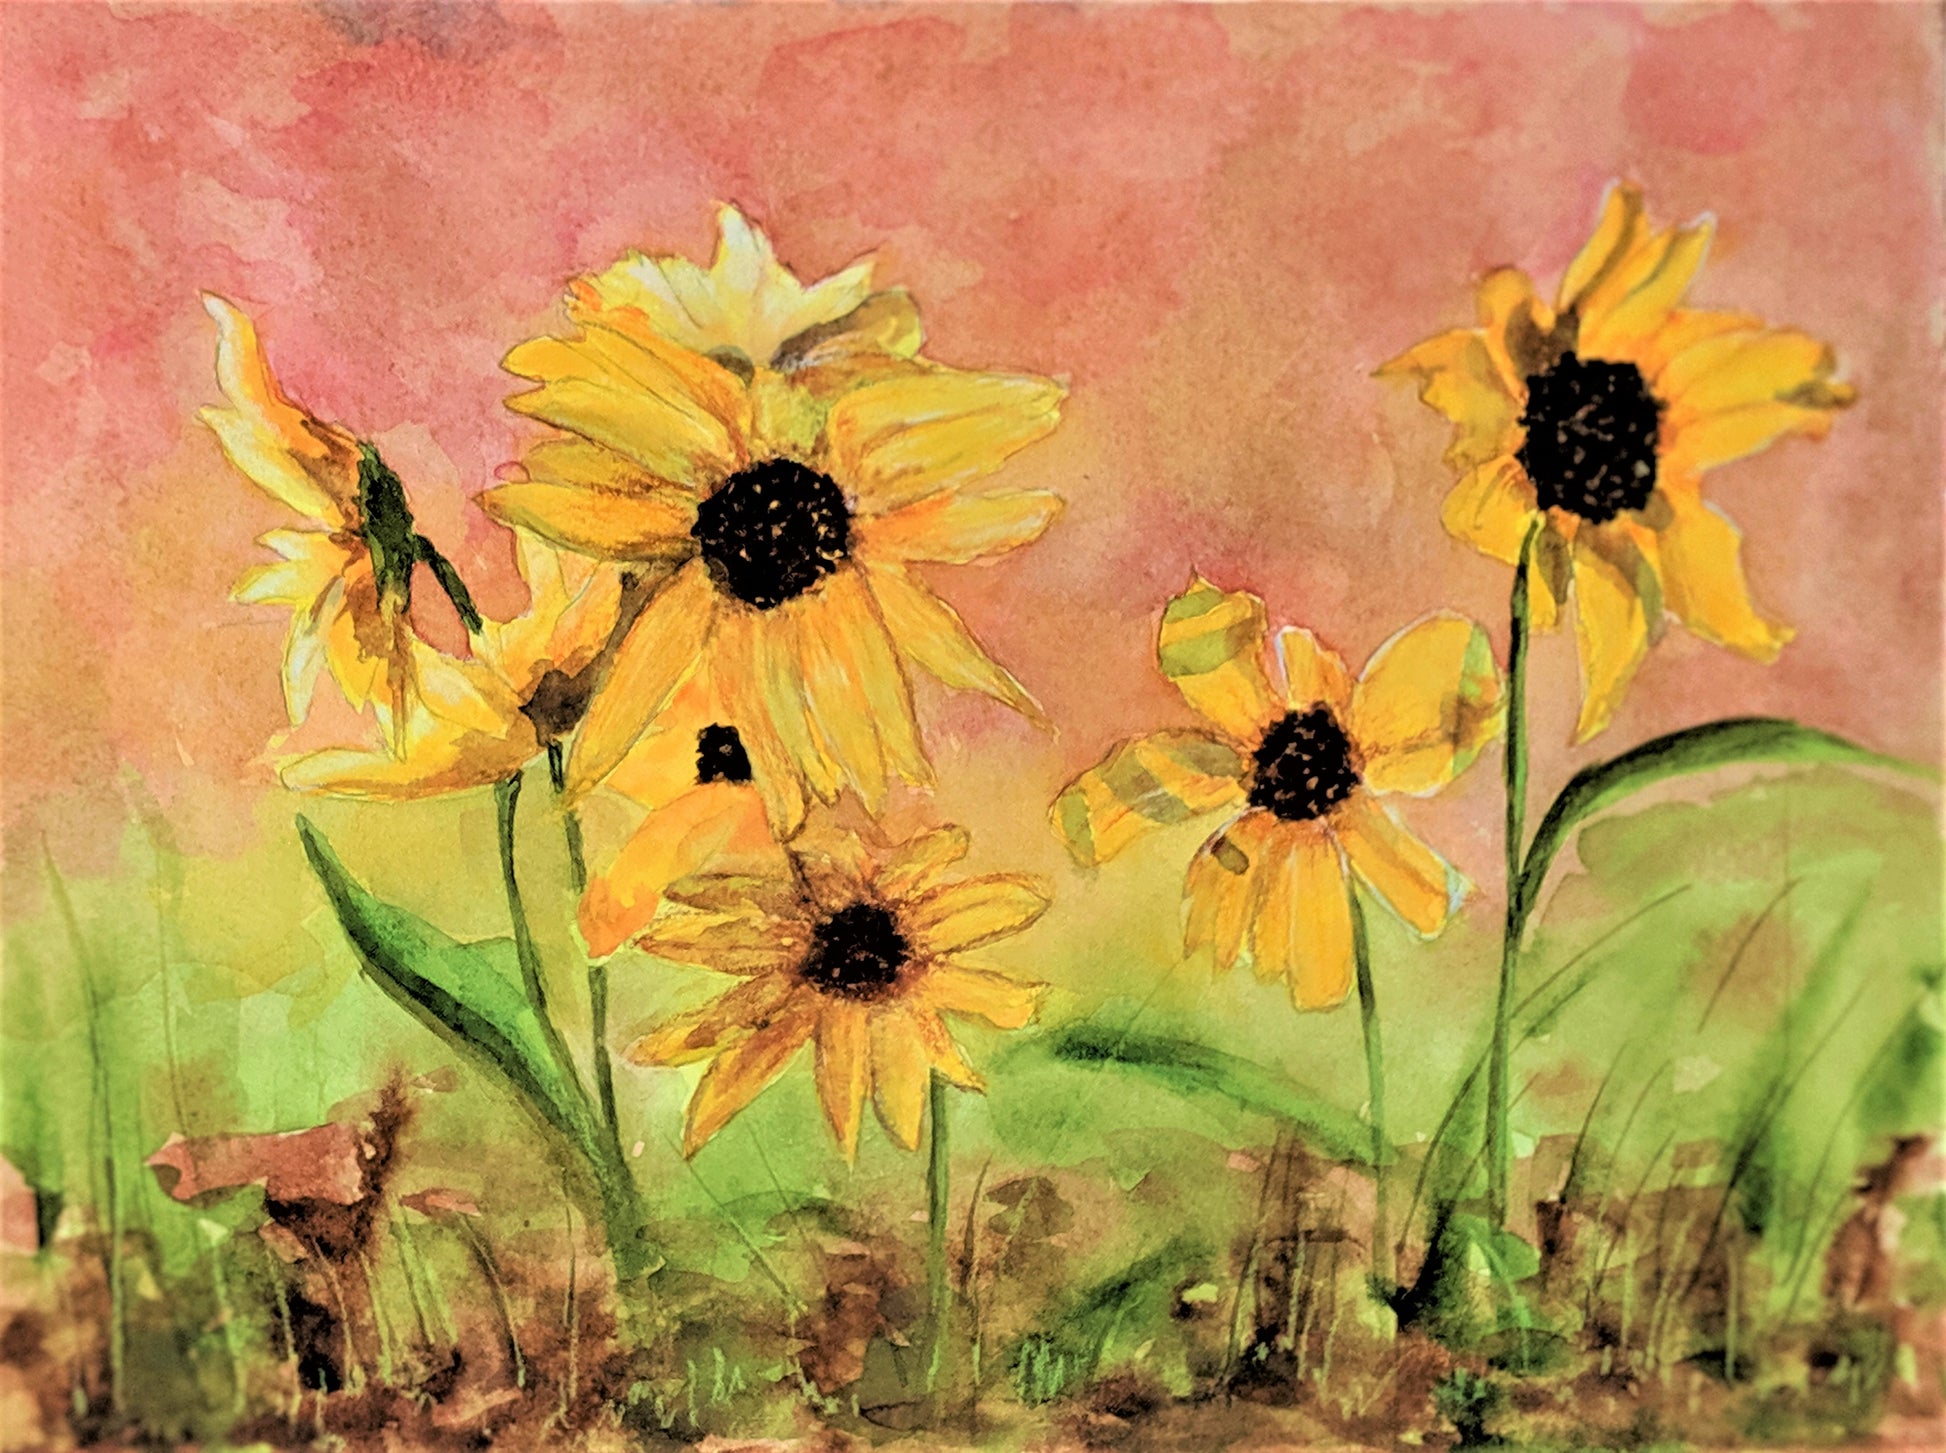 Sunflowers on a hot day watercolor painting